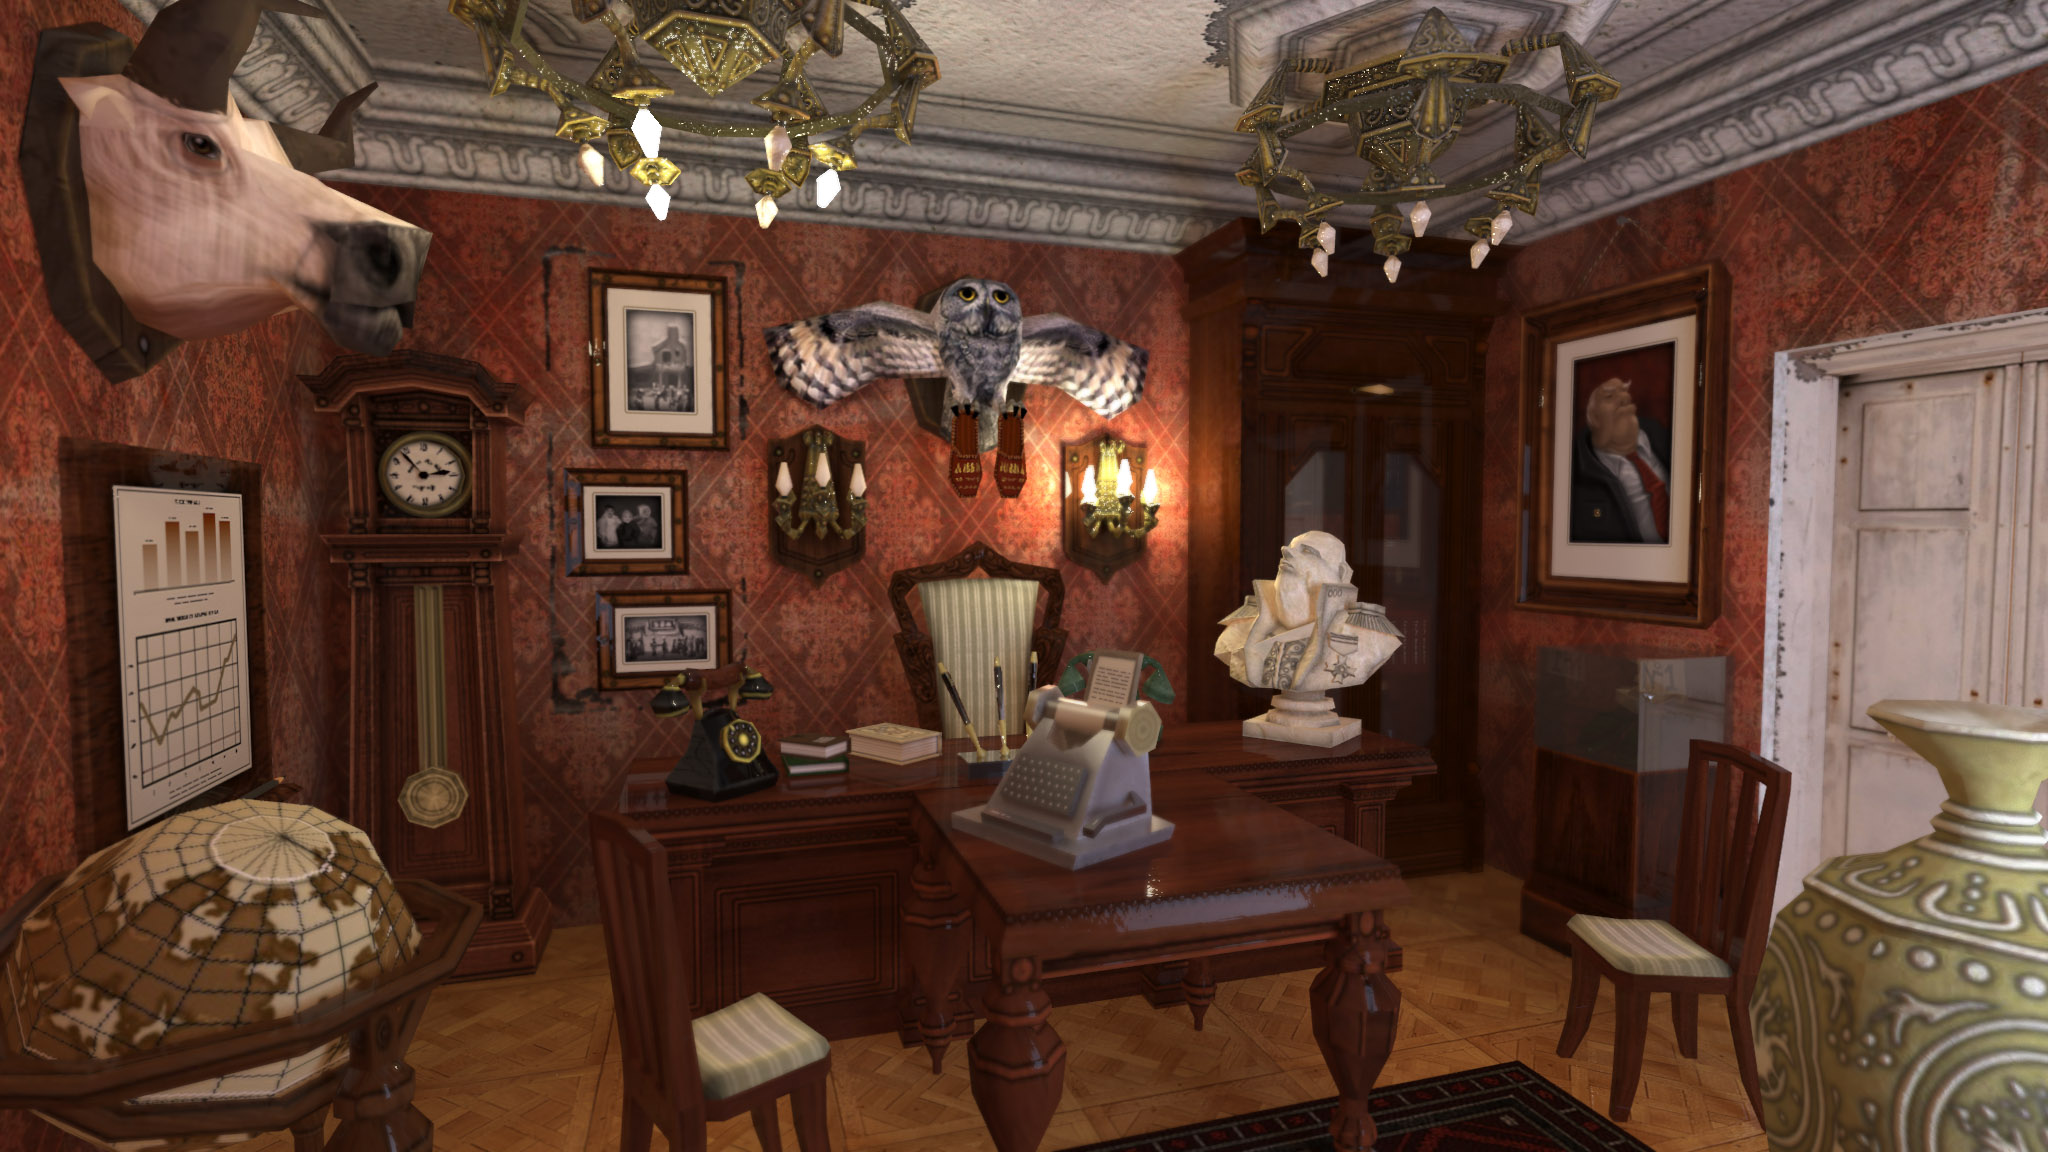 The chief's office in 3D. For ZuZuZu mobile game.